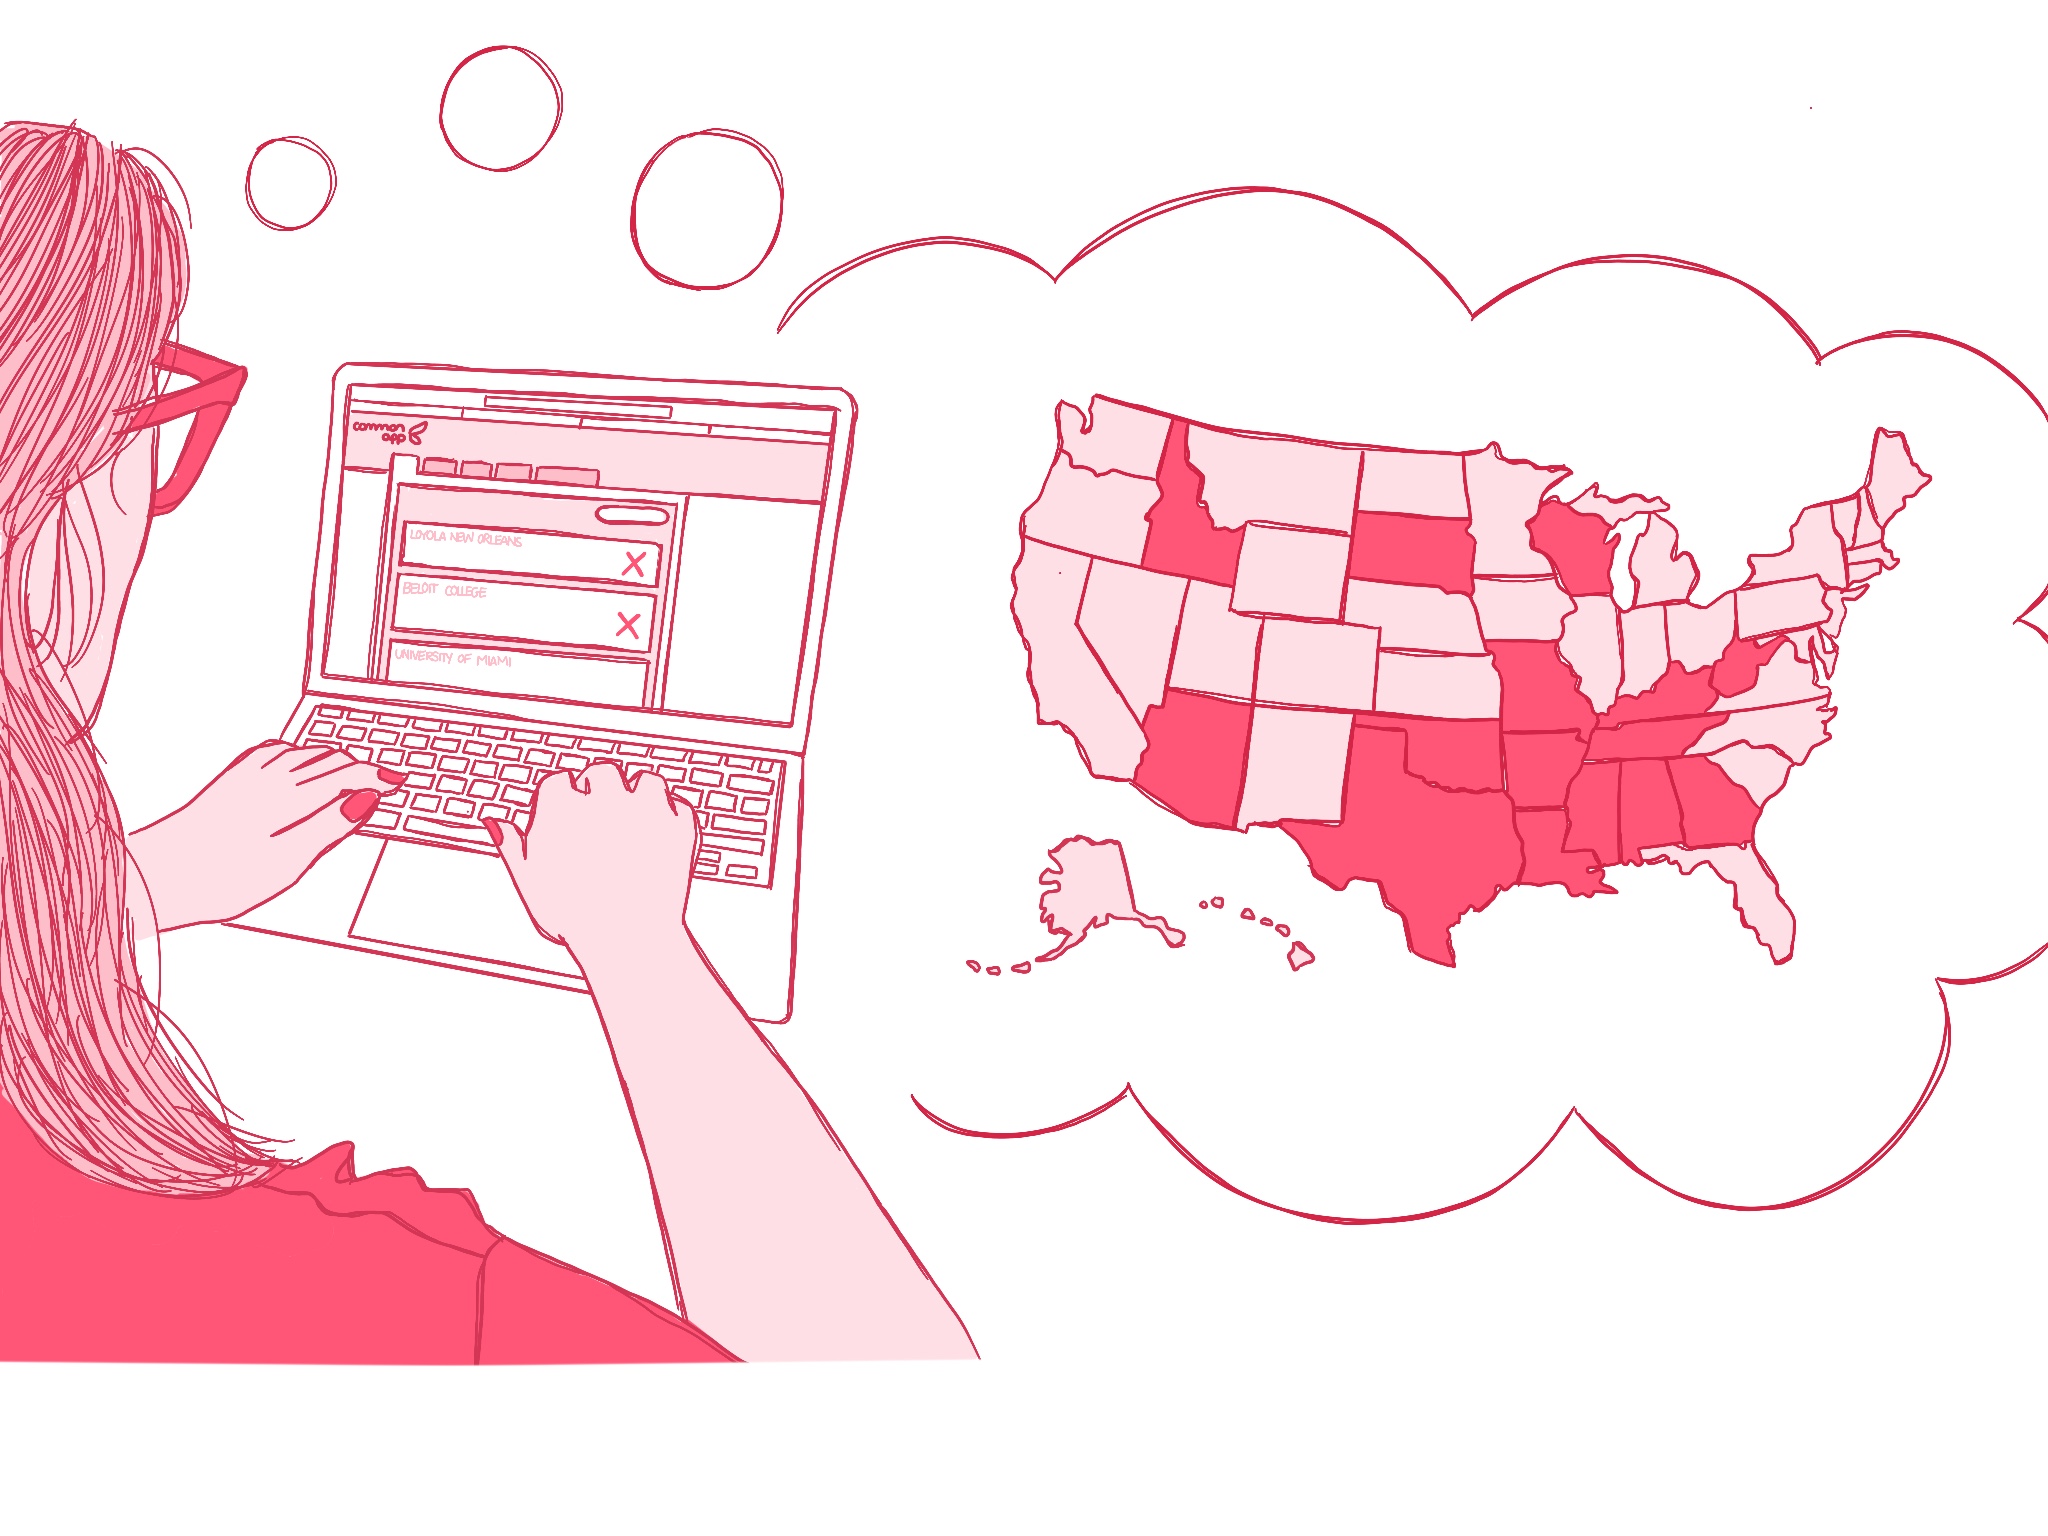 A drawing of a teenage girl filling out a college application . A thought bubble comes out of the computer and shows a map of the United States where the states where abortion is banned are shaded in dark pink. The drawing is done is shades of pink with a white background.